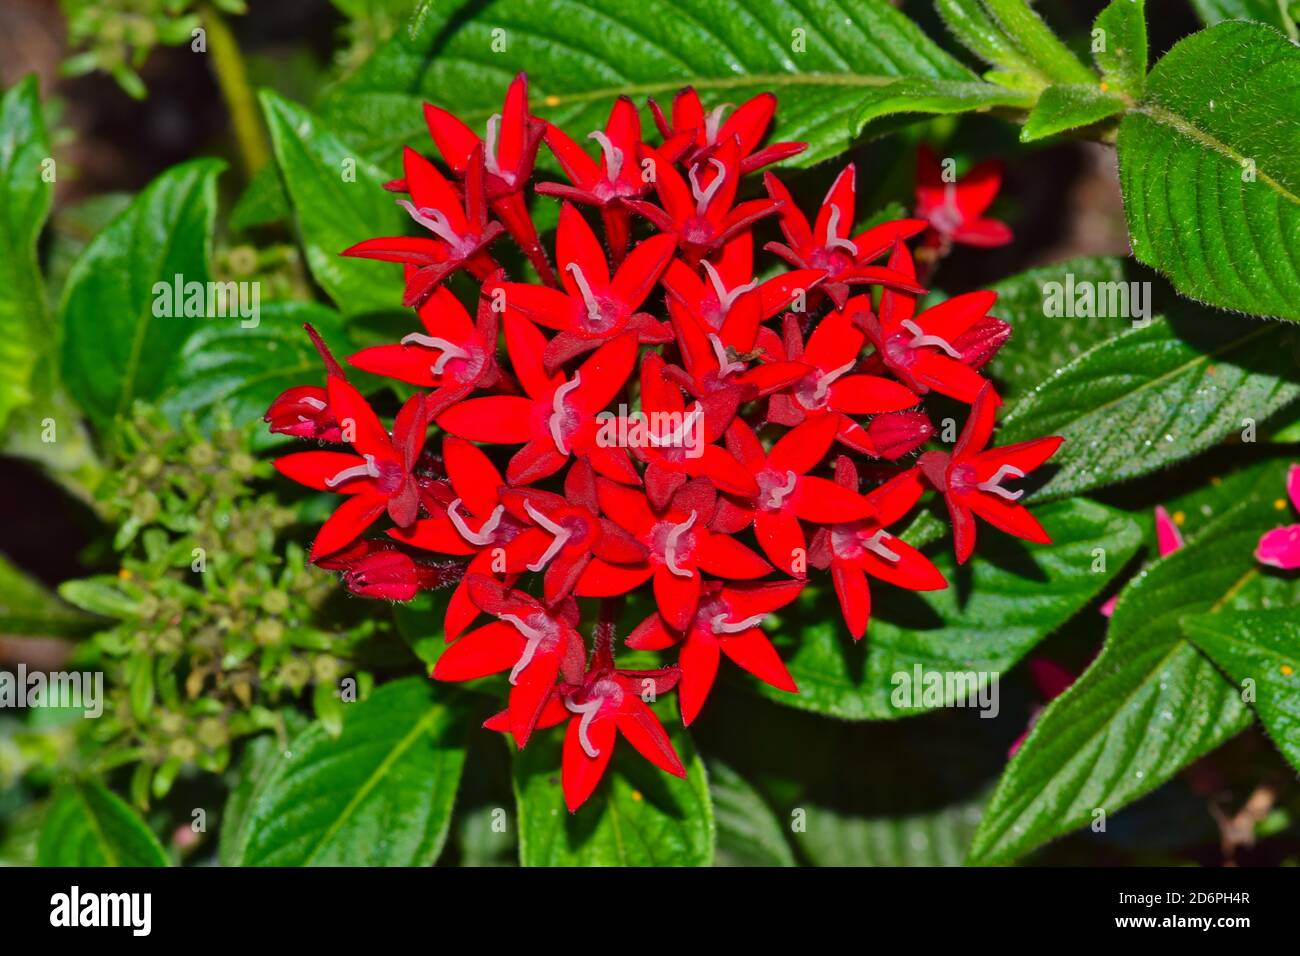 Egyptian Star Cluster flowers (Pentas lanceolata). These annual flowers are popular in ornamental gardens and come in a variety of colors. Stock Photo